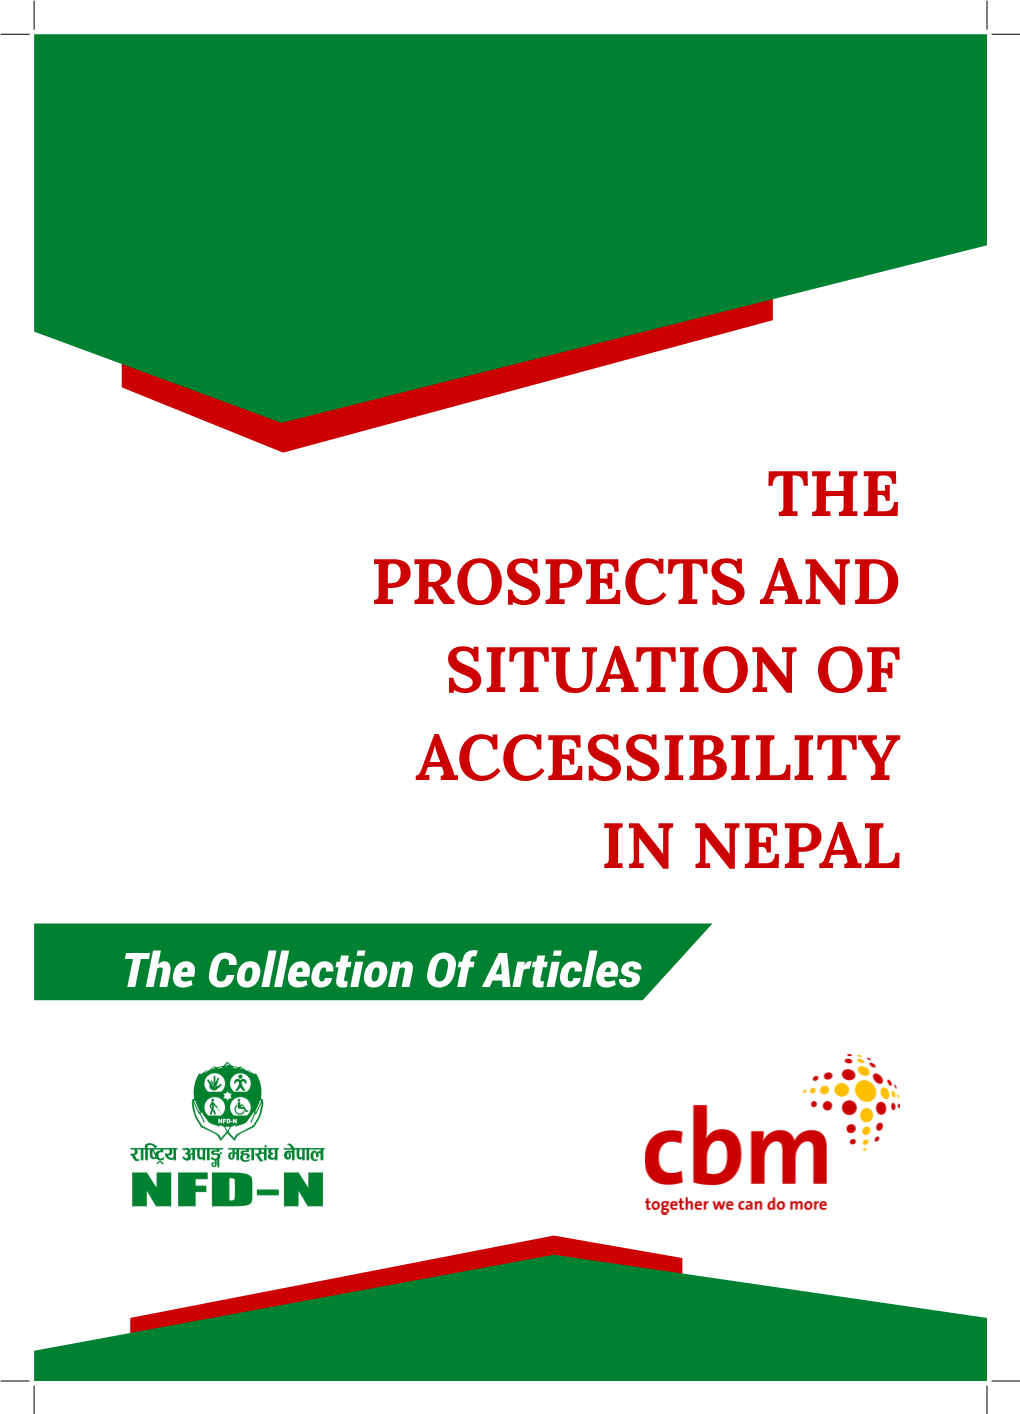 The Prospects and Situation of Accessibility in Nepal